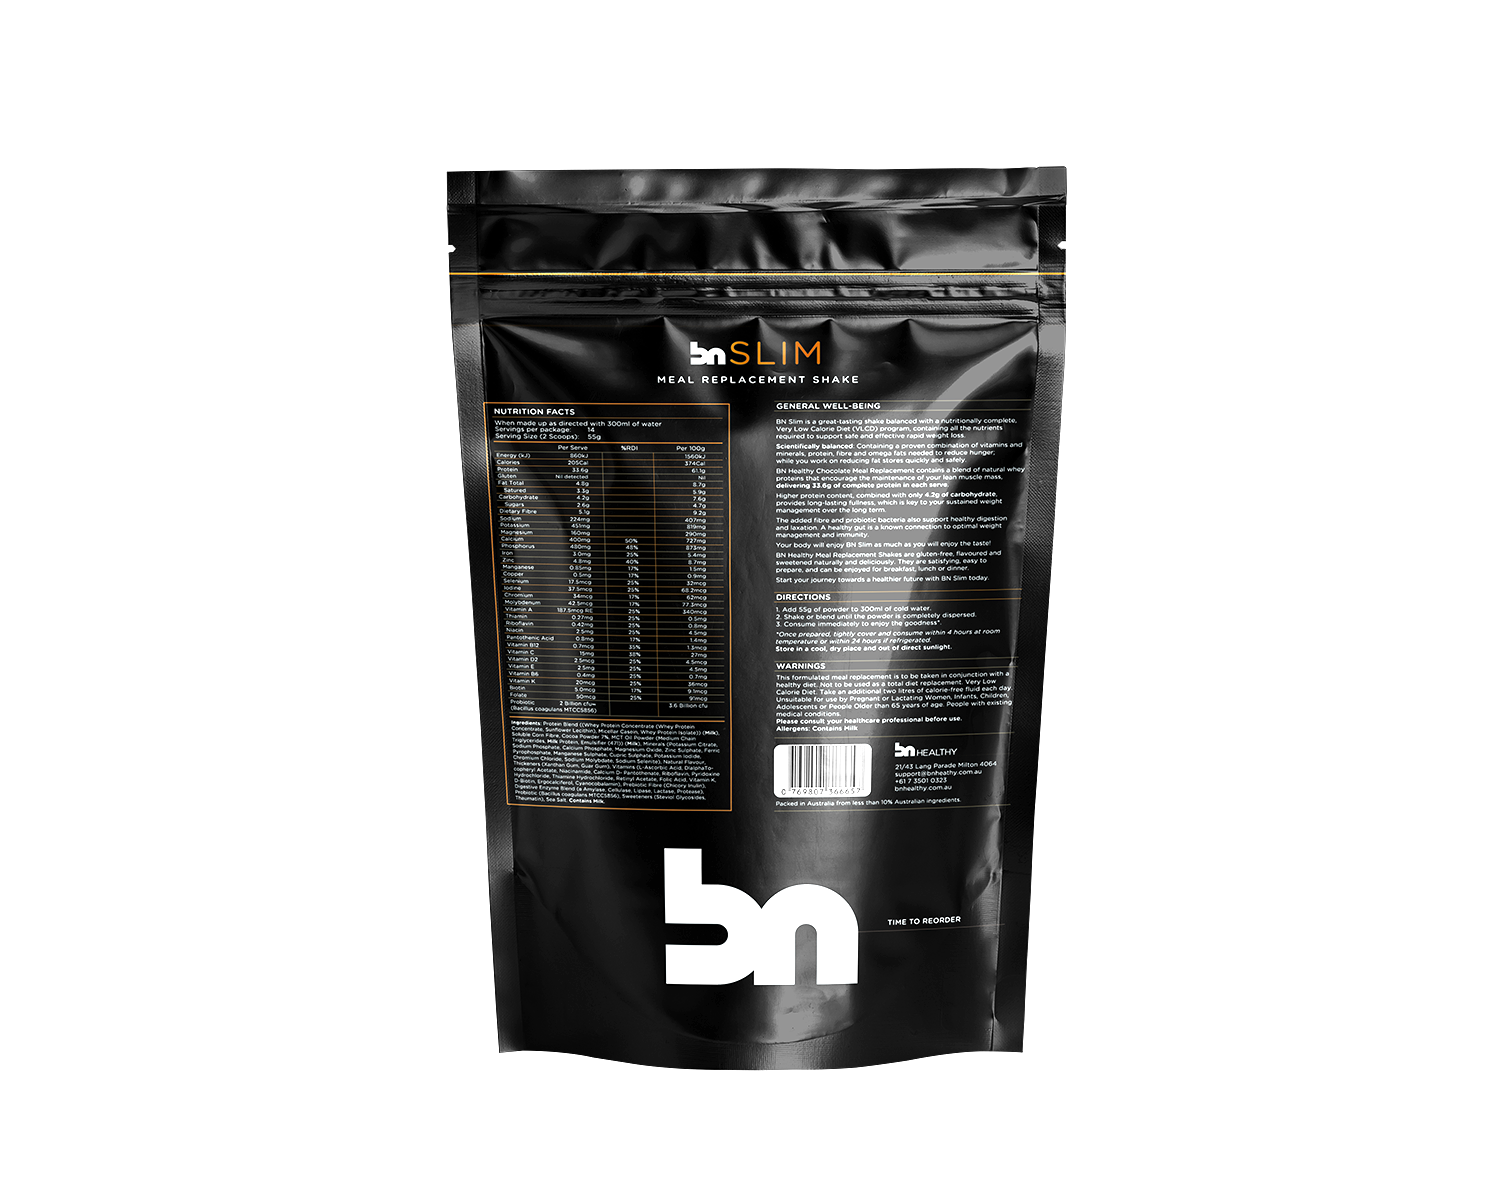 BN Slim - Meal Replacement Shake chocolate flavour nutritional information 